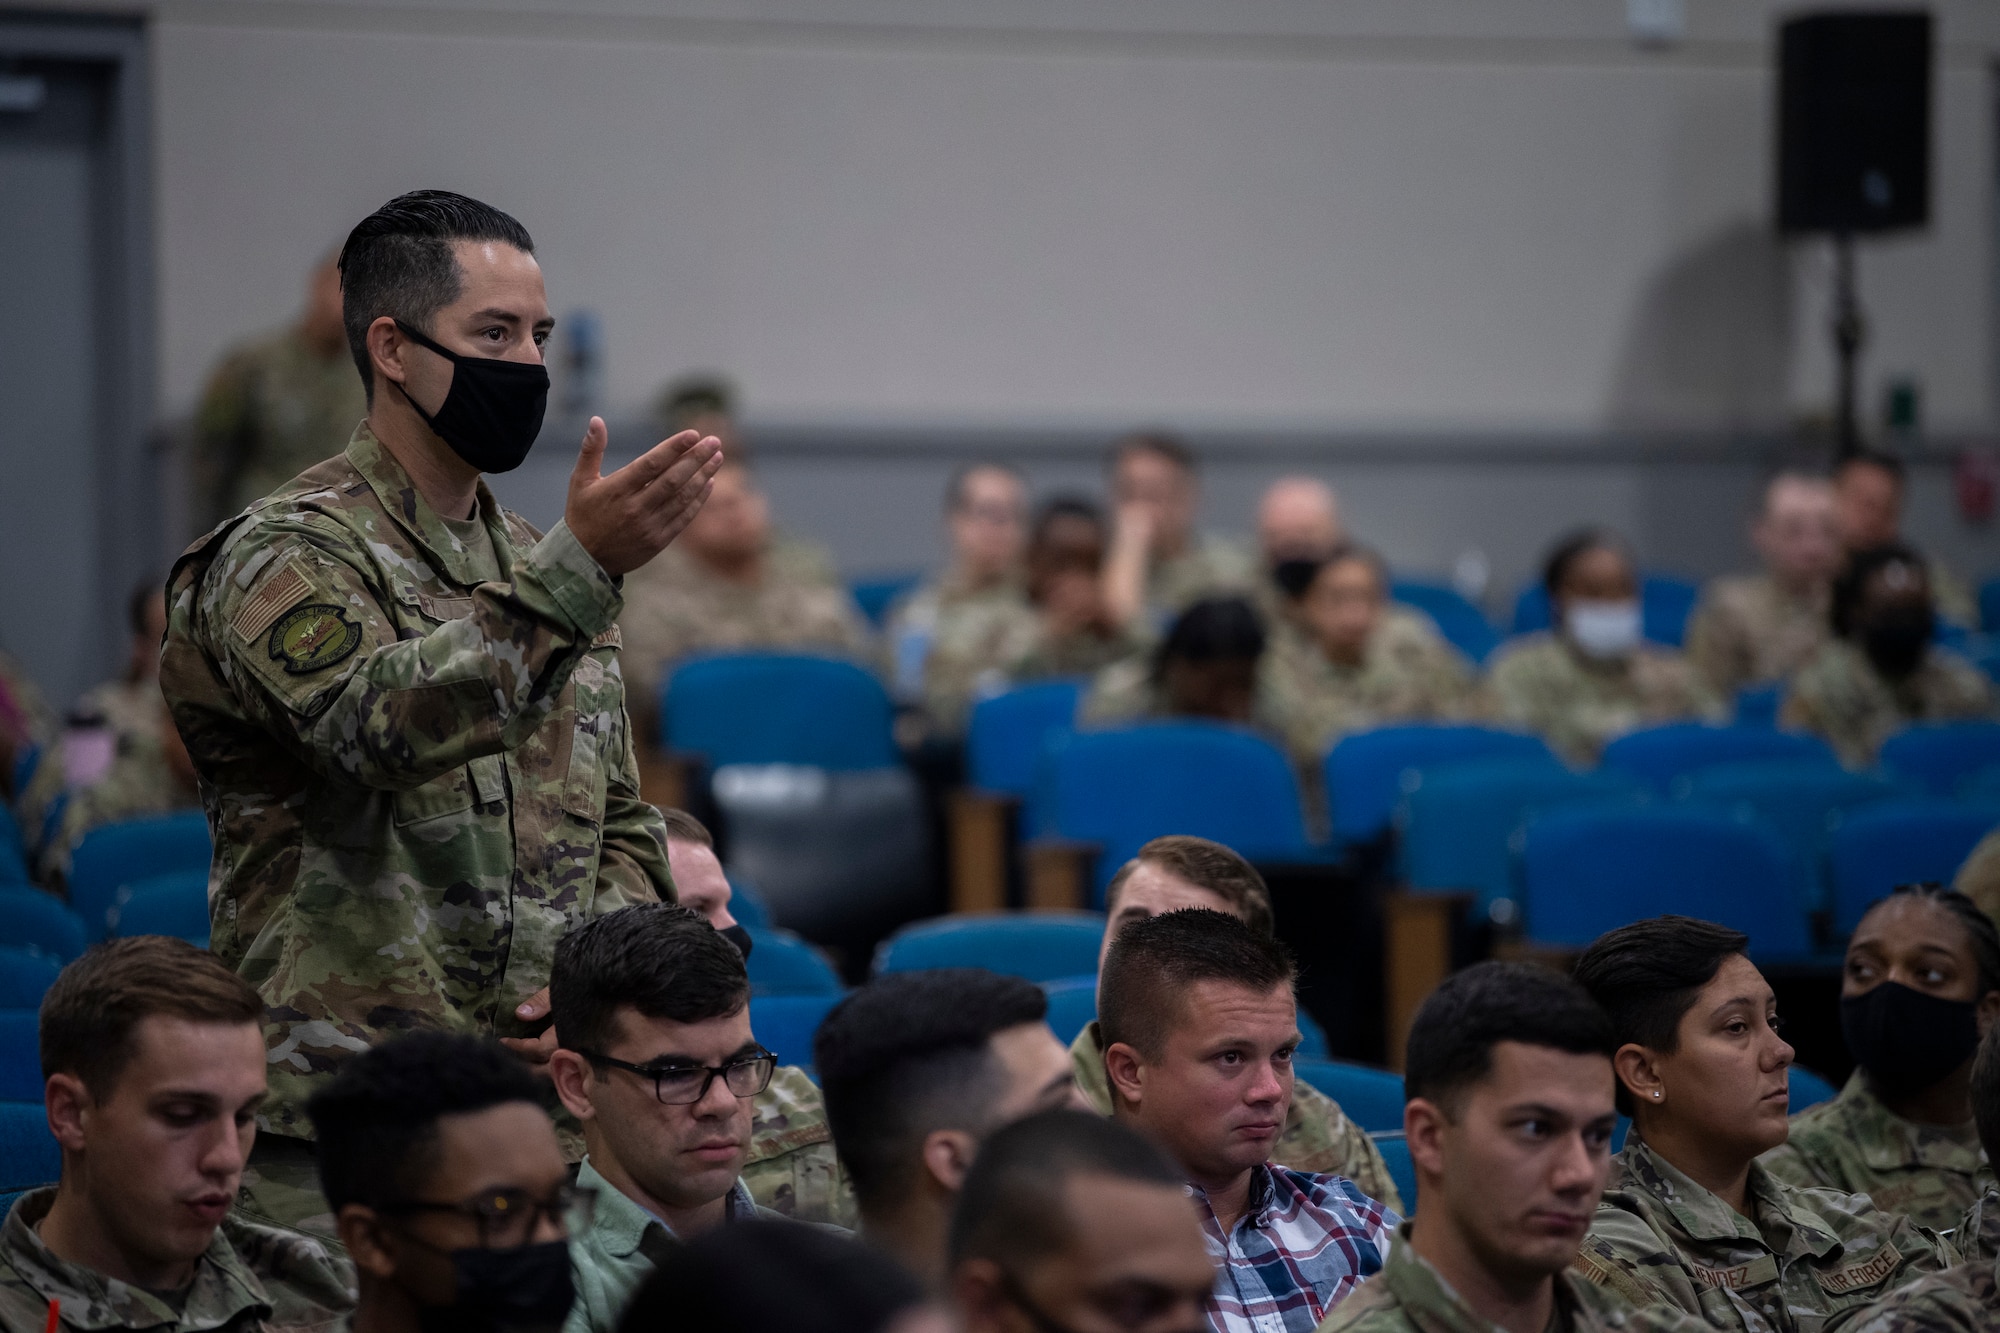 A photo of an Airmen standing in an auditorium with his hand up.